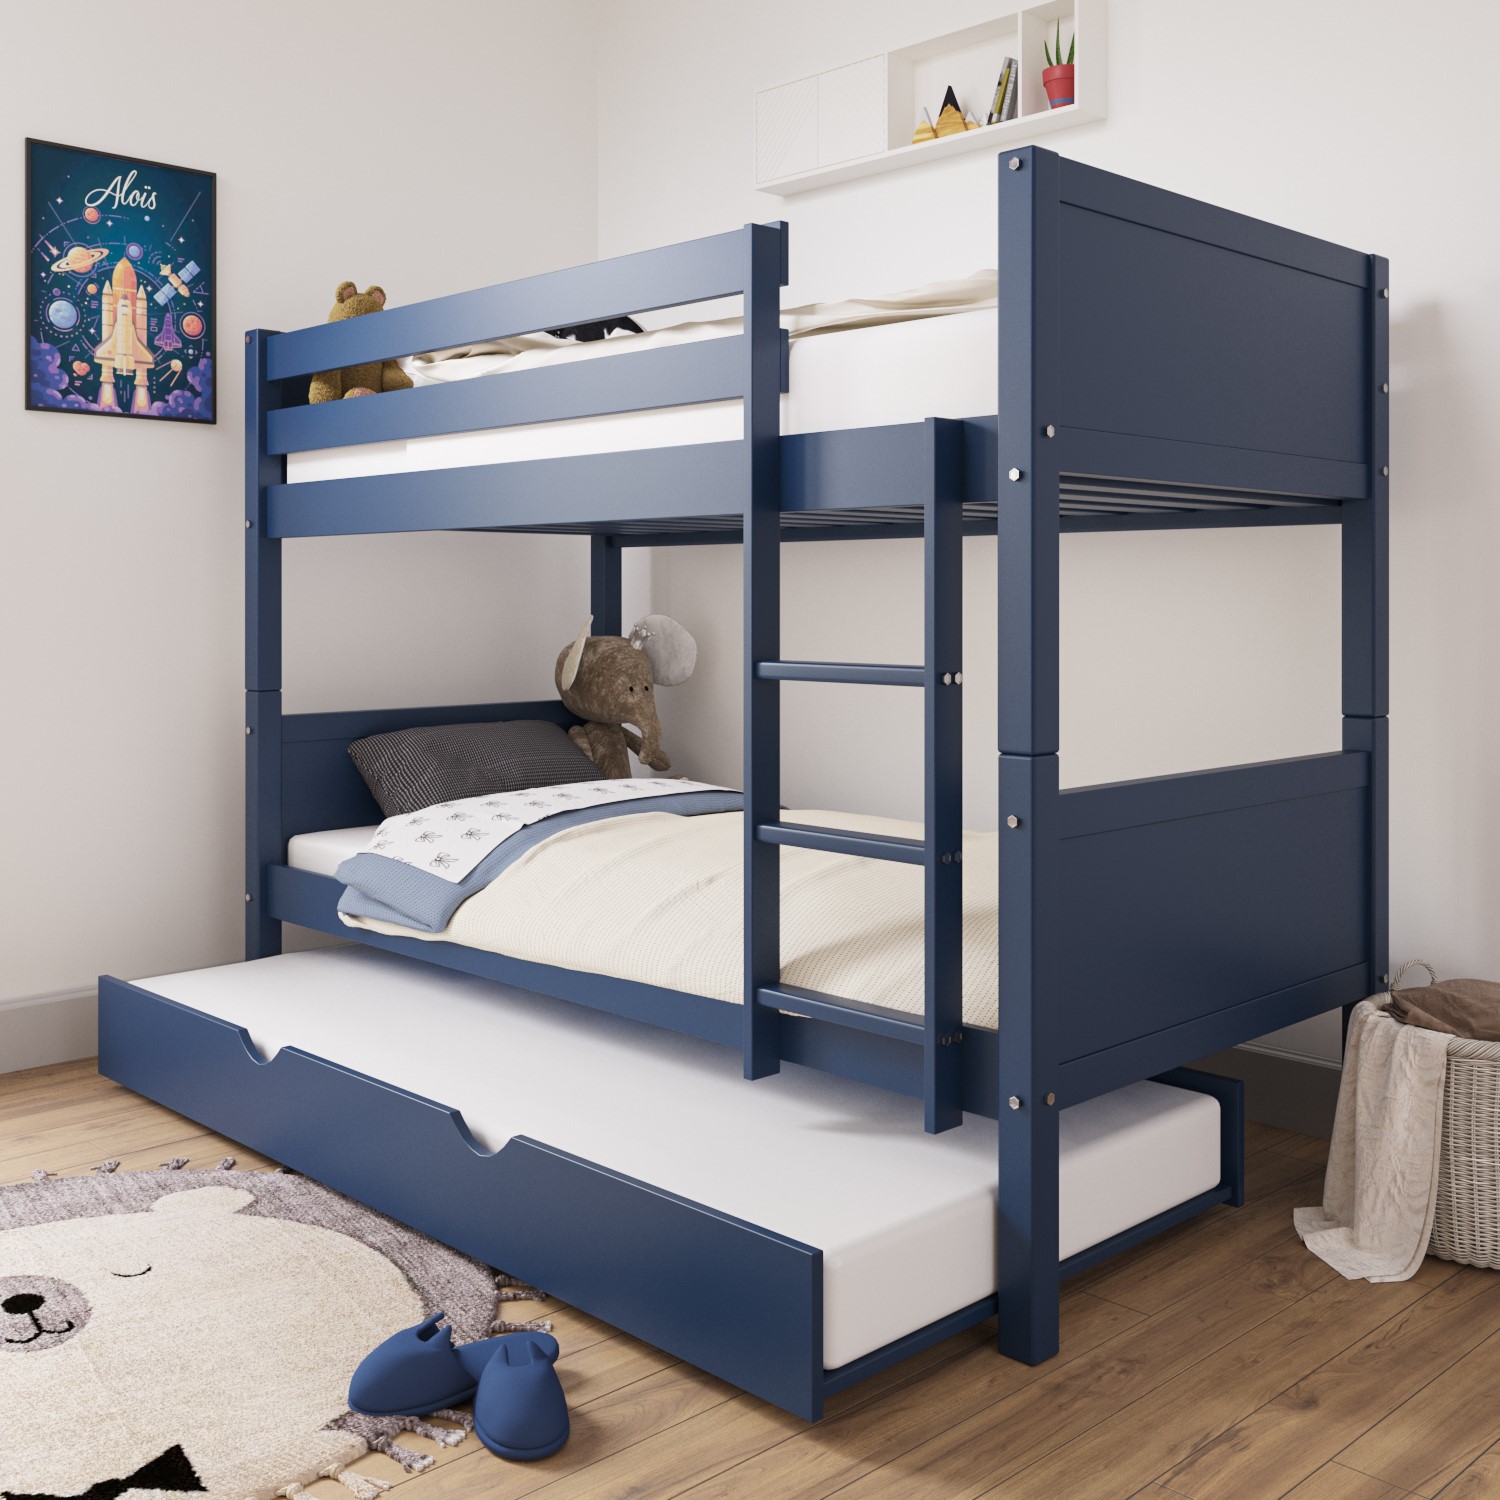 Navy Blue Wooden Bunk Bed With Trundle, Wooden Bunk Bed Connectors